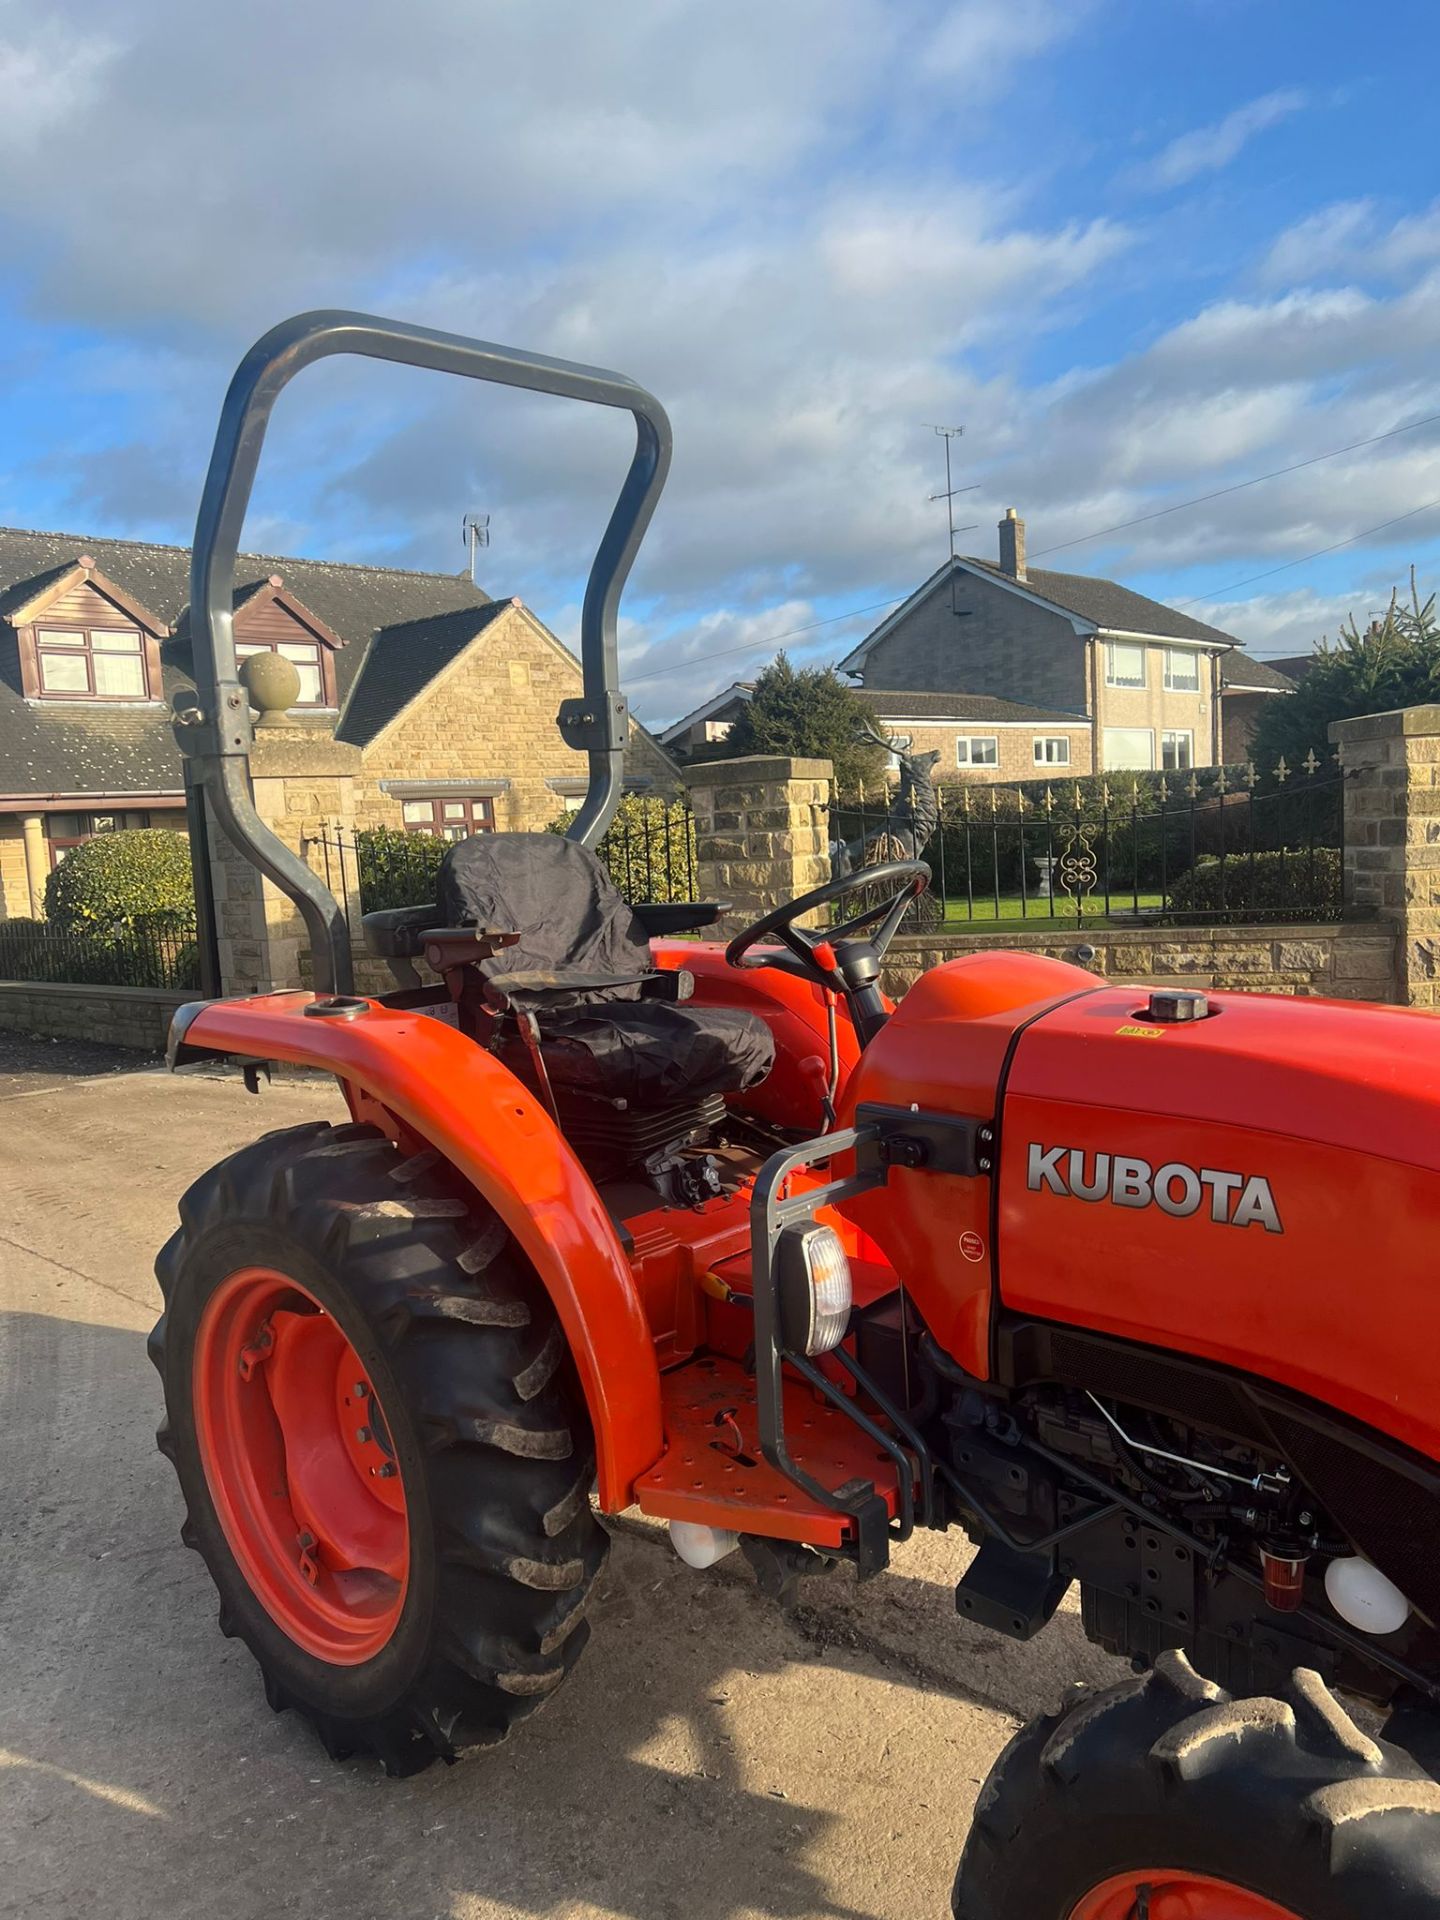 2019 KUBOTA L1361 4 WHEEL DRIVE TRACTOR, 36hp, 3 POINT LINKAGE, RUNS AND WORKS *PLUS VAT* - Image 6 of 11